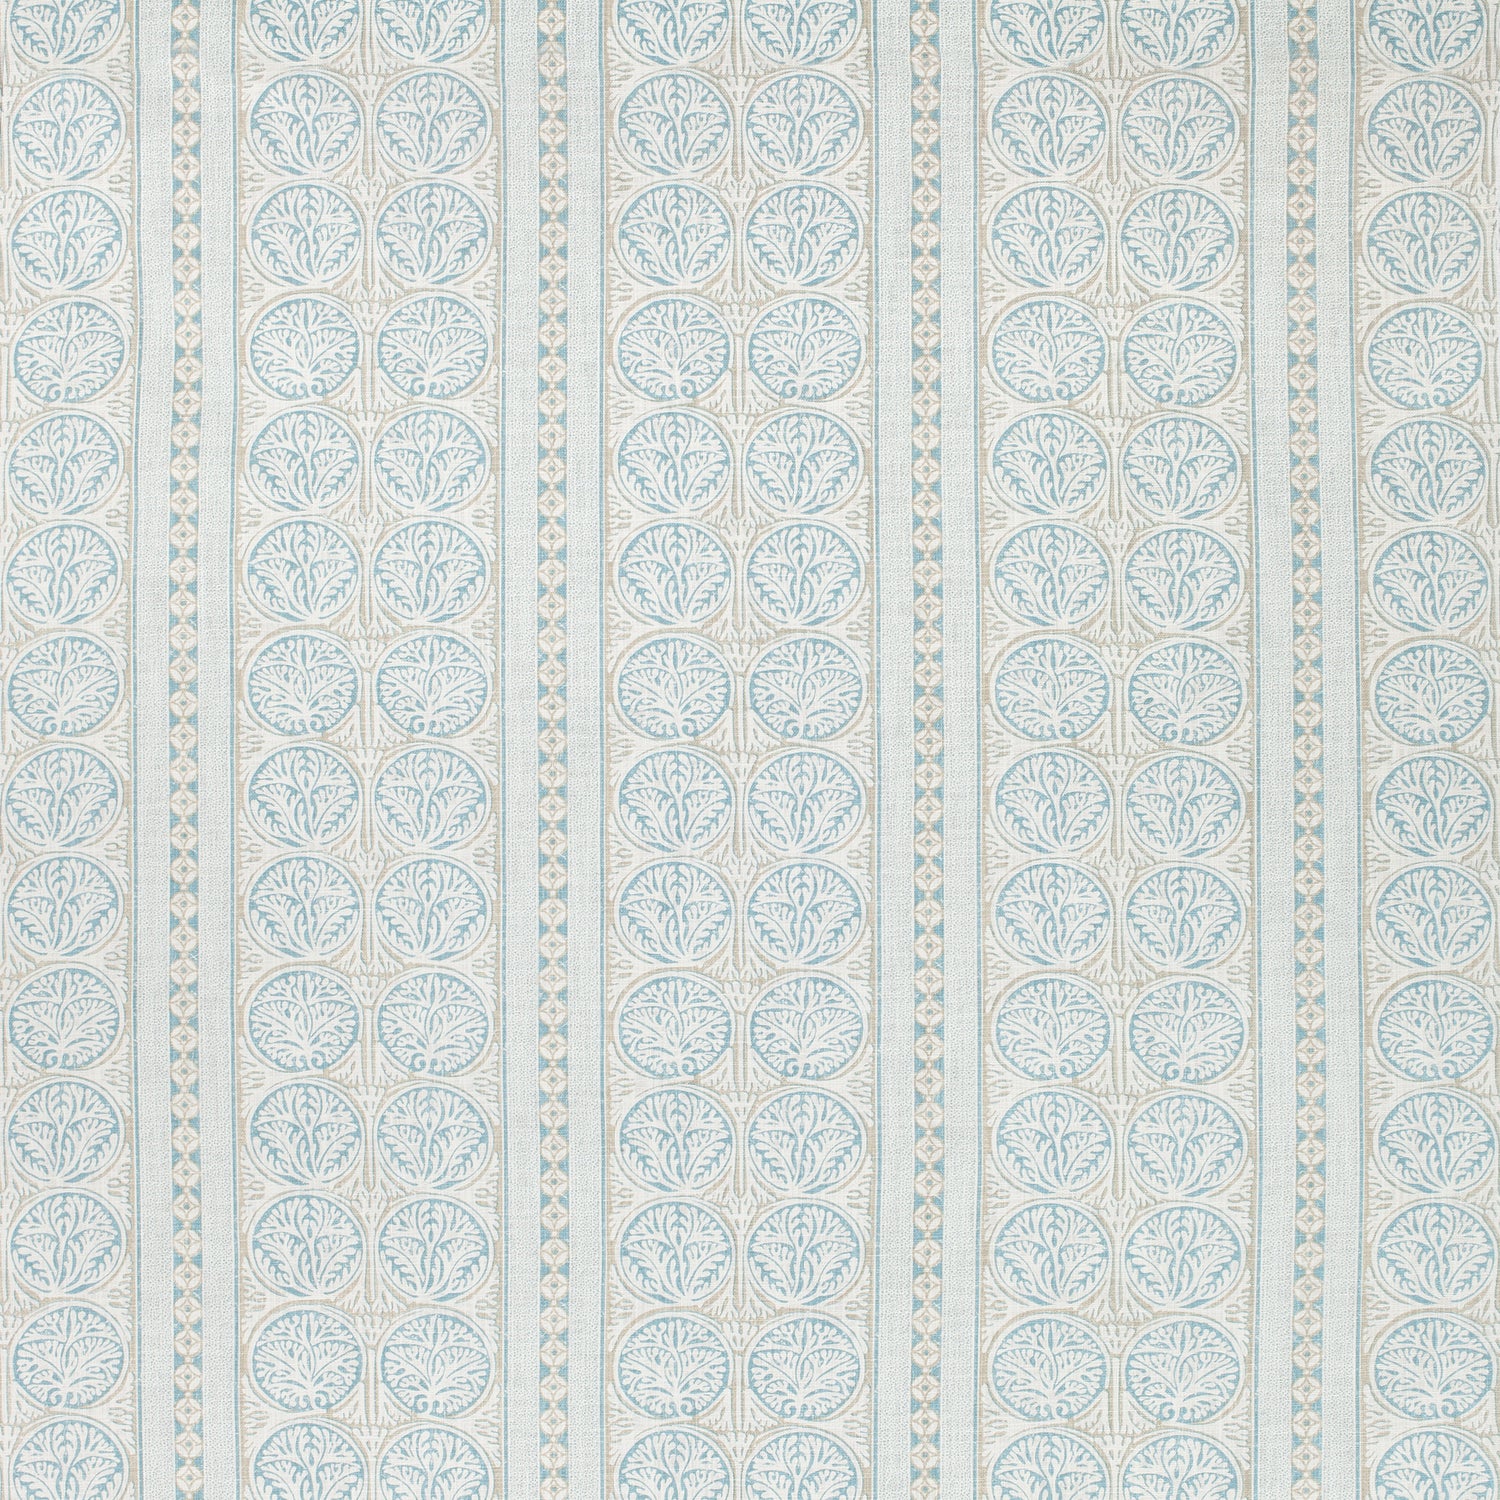 Fair Isle fabric in aqua color - pattern number F988734 - by Thibaut in the Trade Routes collection